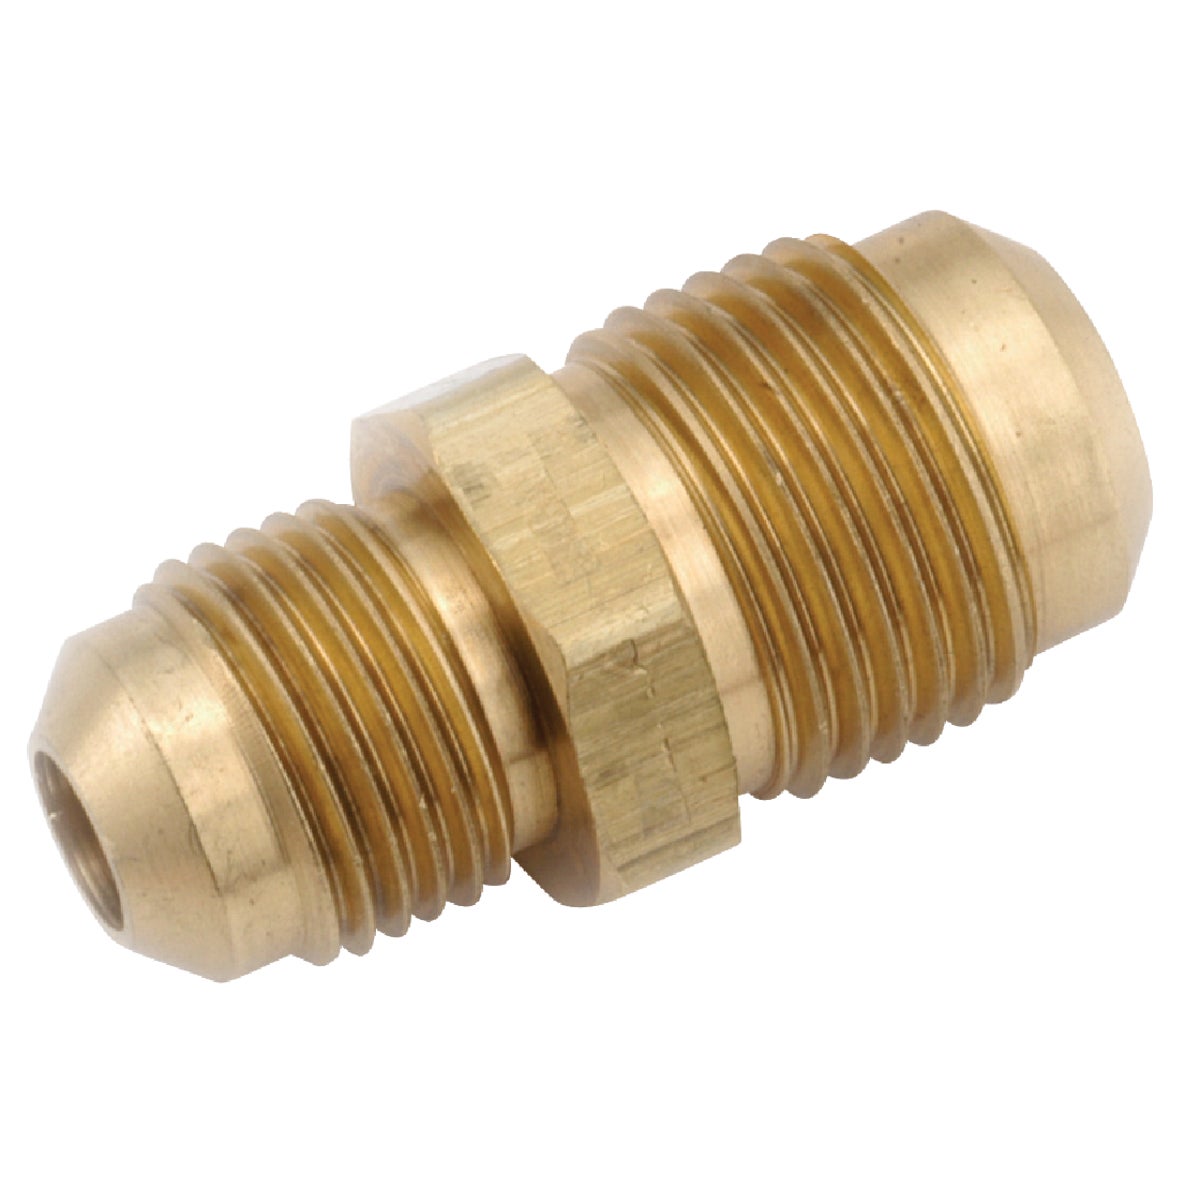 Anderson Metals 1/2 In. x 1/4 In. Brass Low Lead Low Lead Reducing Flare Union